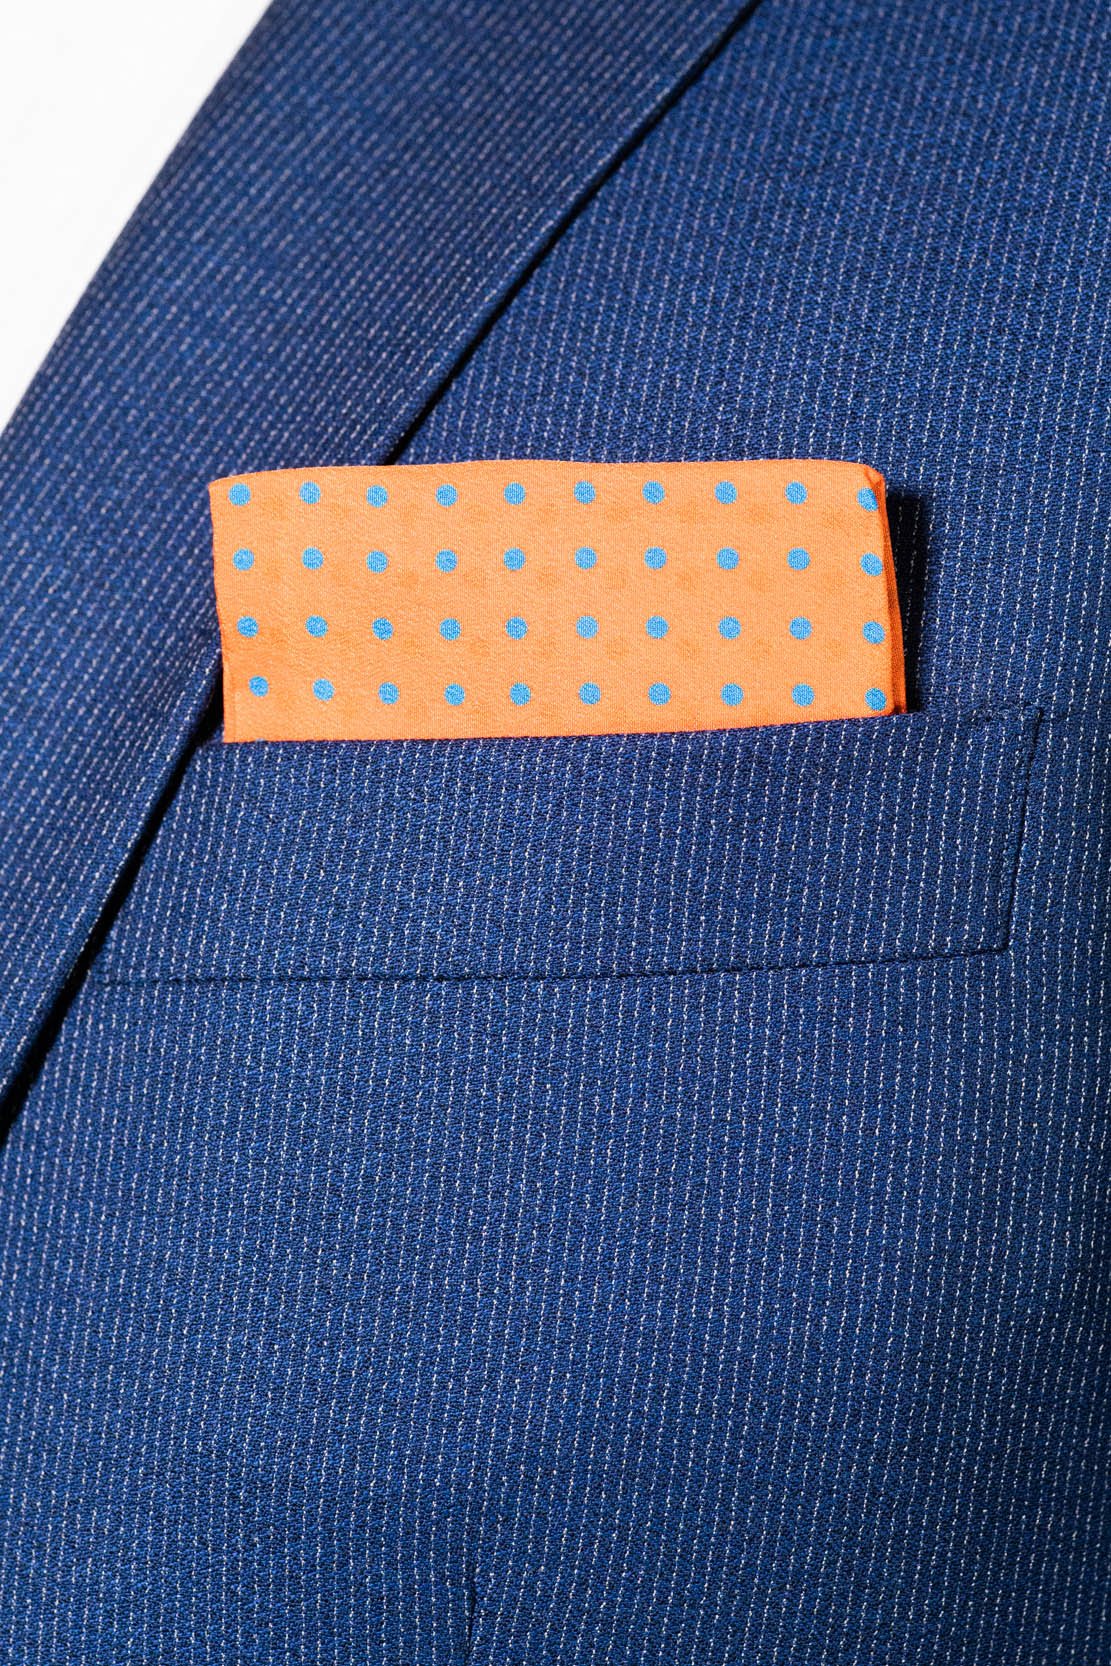 RARE CUT's Pumpkin Spice Dots Pocket Square Worn in a Suit Jacket